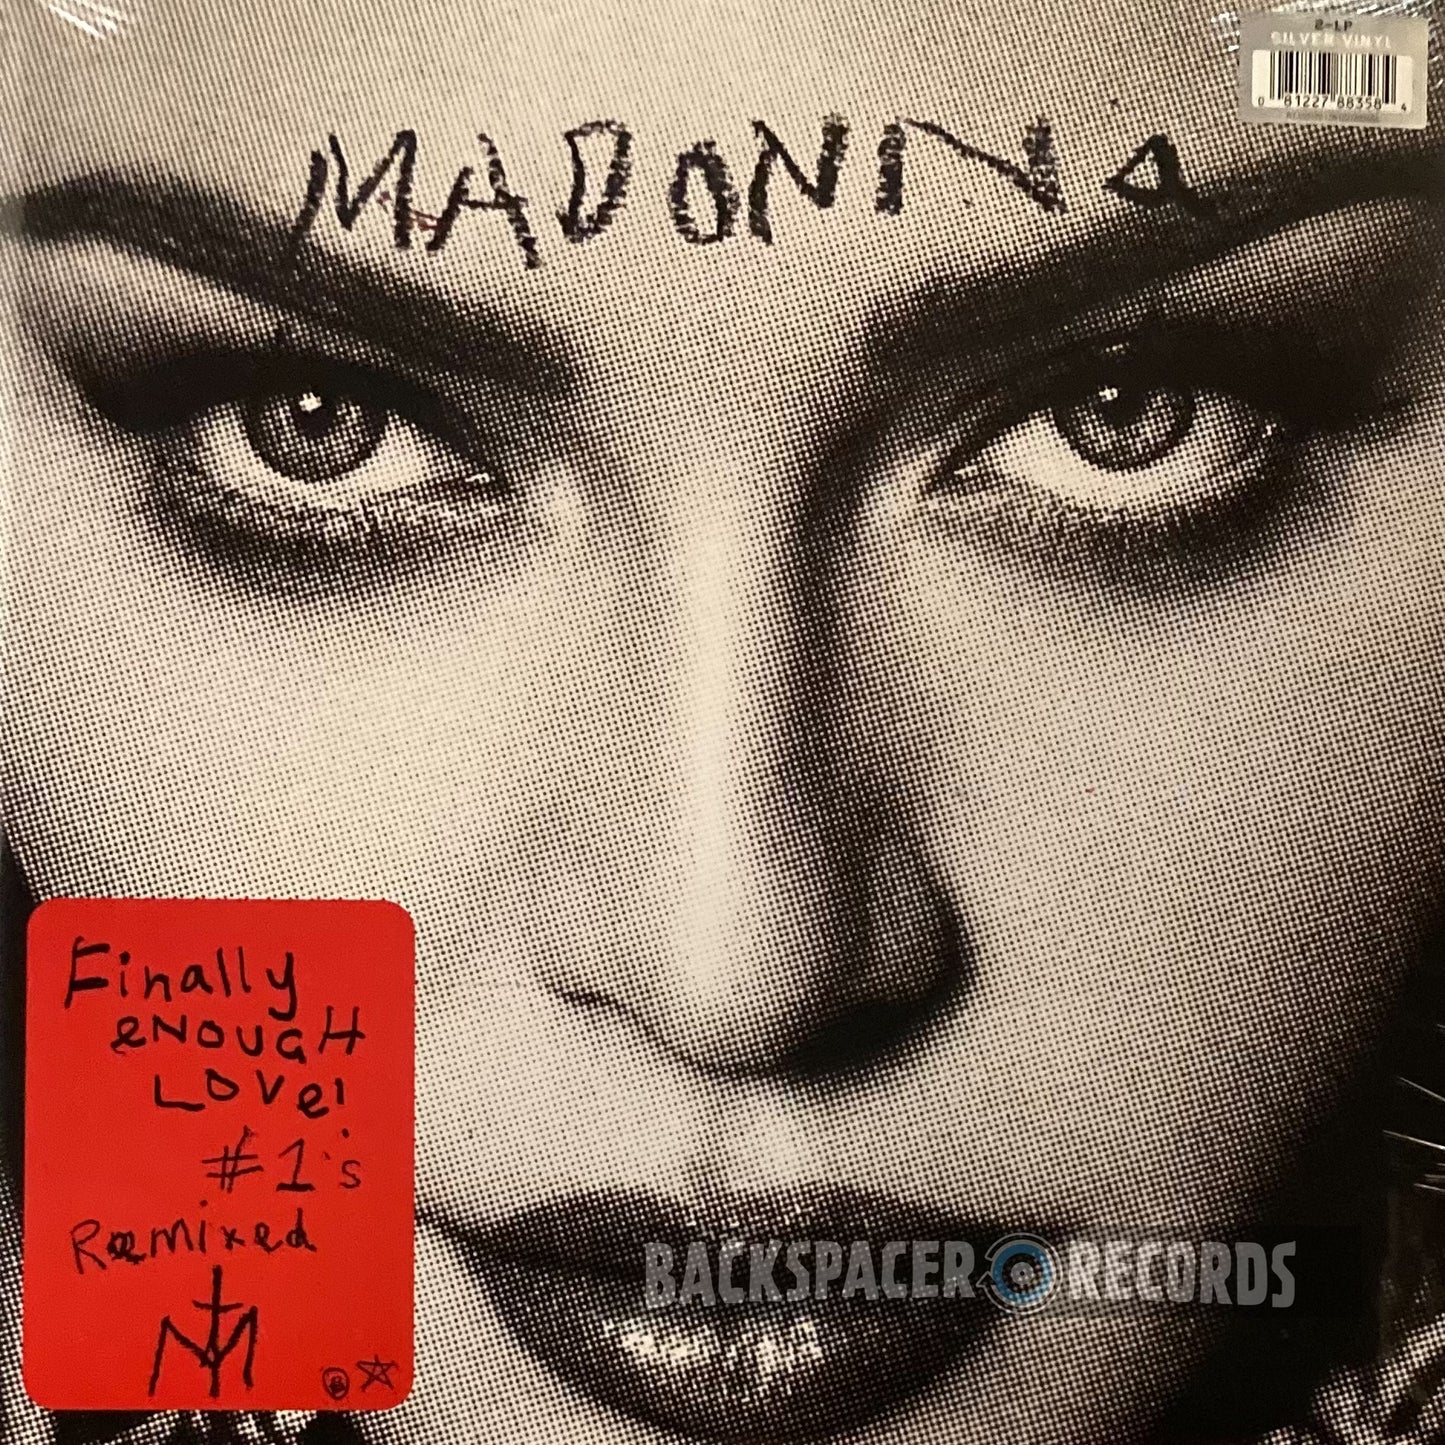 Madonna - Finally Enough Love (Limited Edition) 2-LP (Sealed)